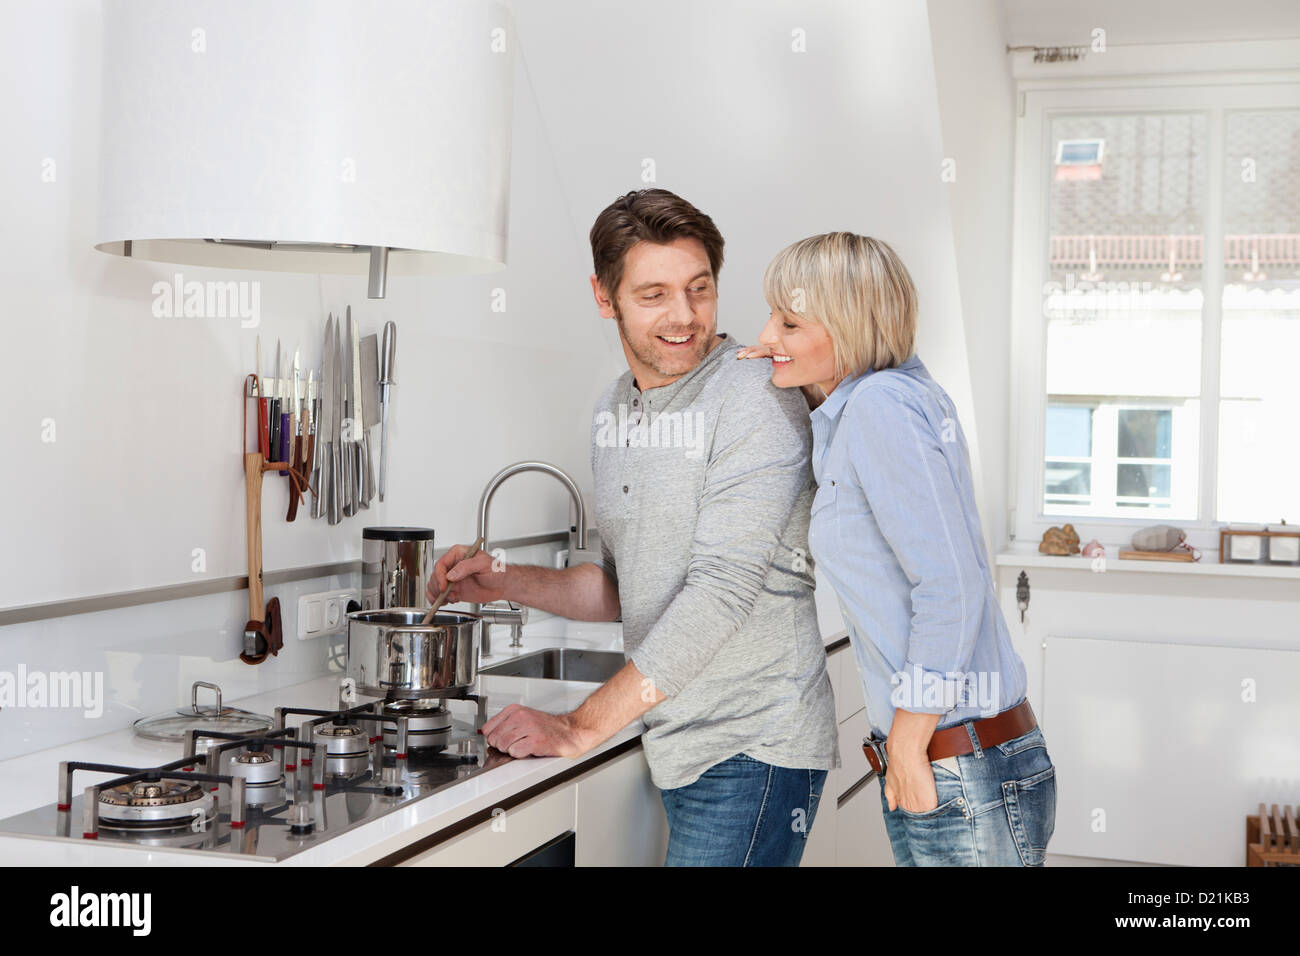 Germany, Bavaria, Munich, Mature couple preparing food in kitchen Banque D'Images